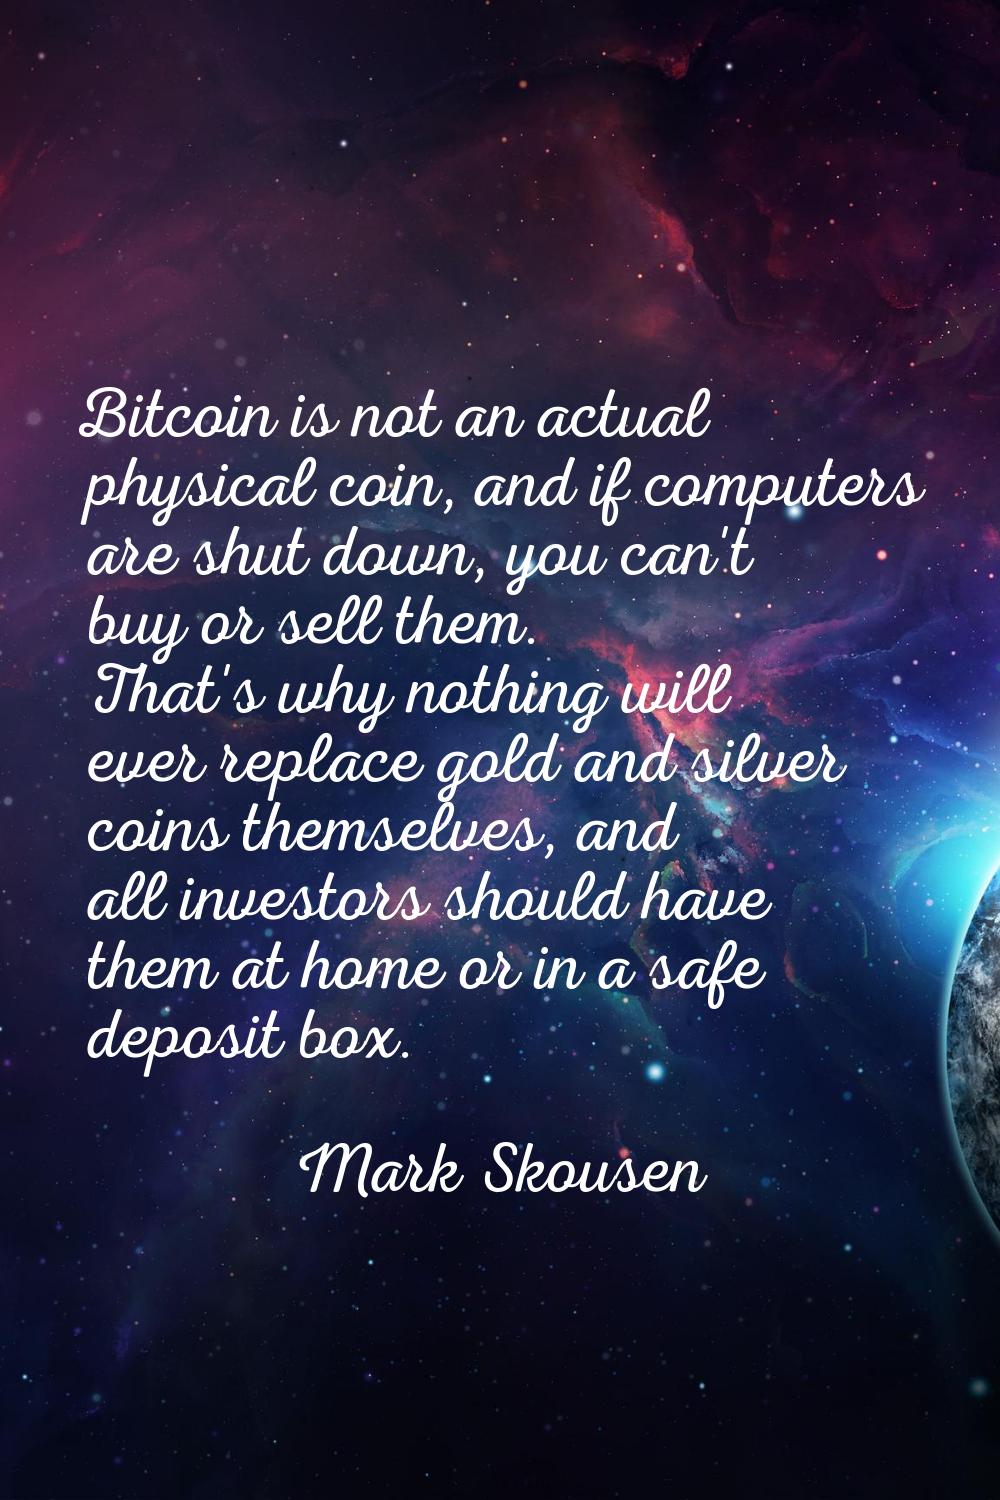 Bitcoin is not an actual physical coin, and if computers are shut down, you can't buy or sell them.